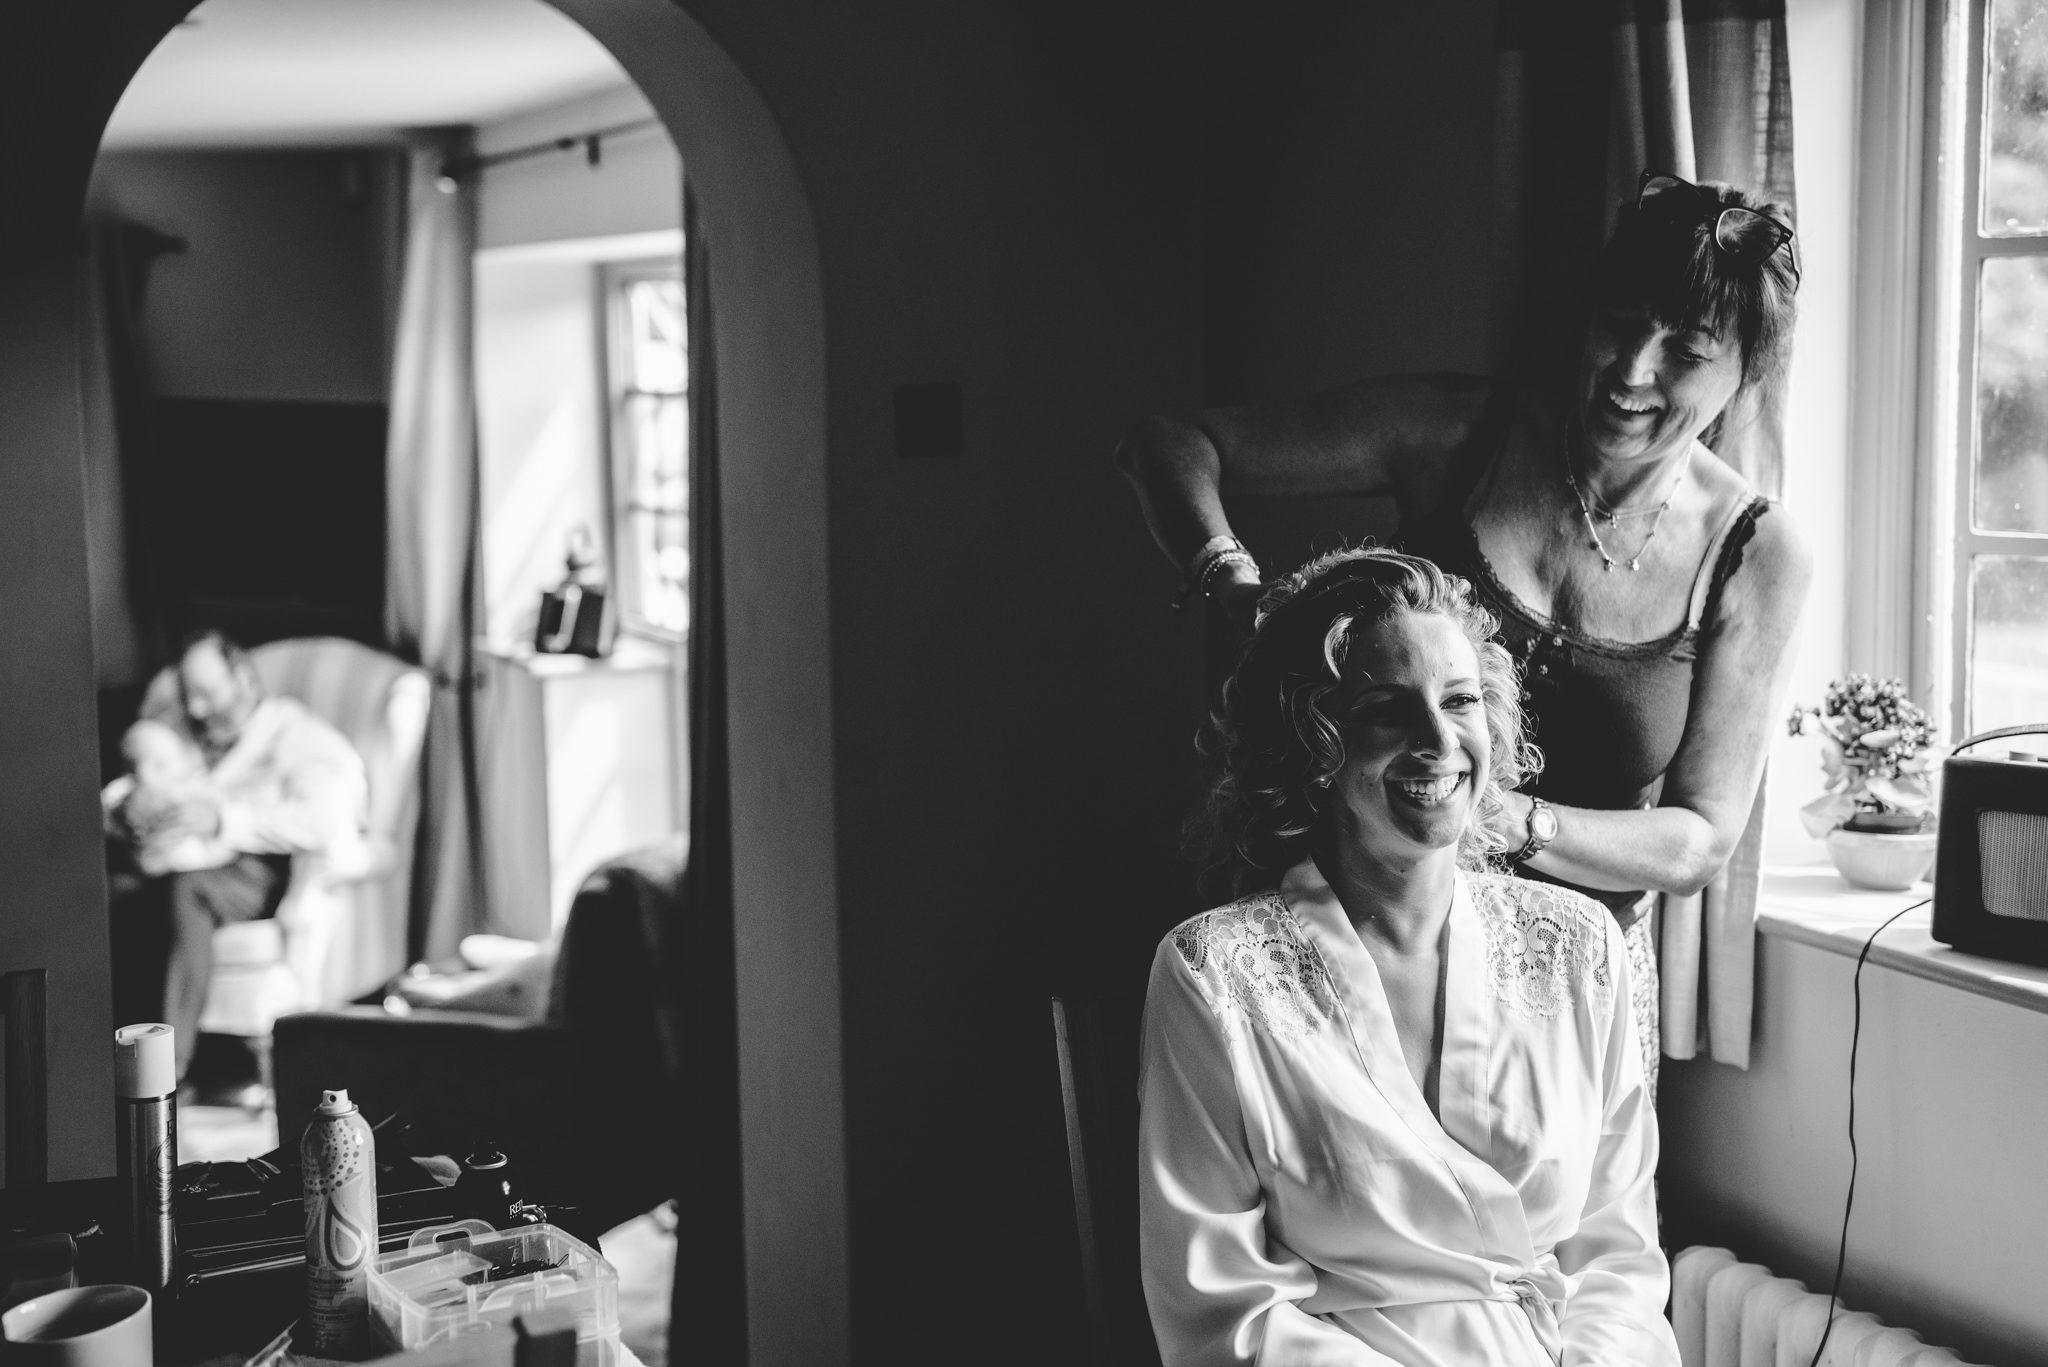 Black and white image of the bride getting ready for her wedding